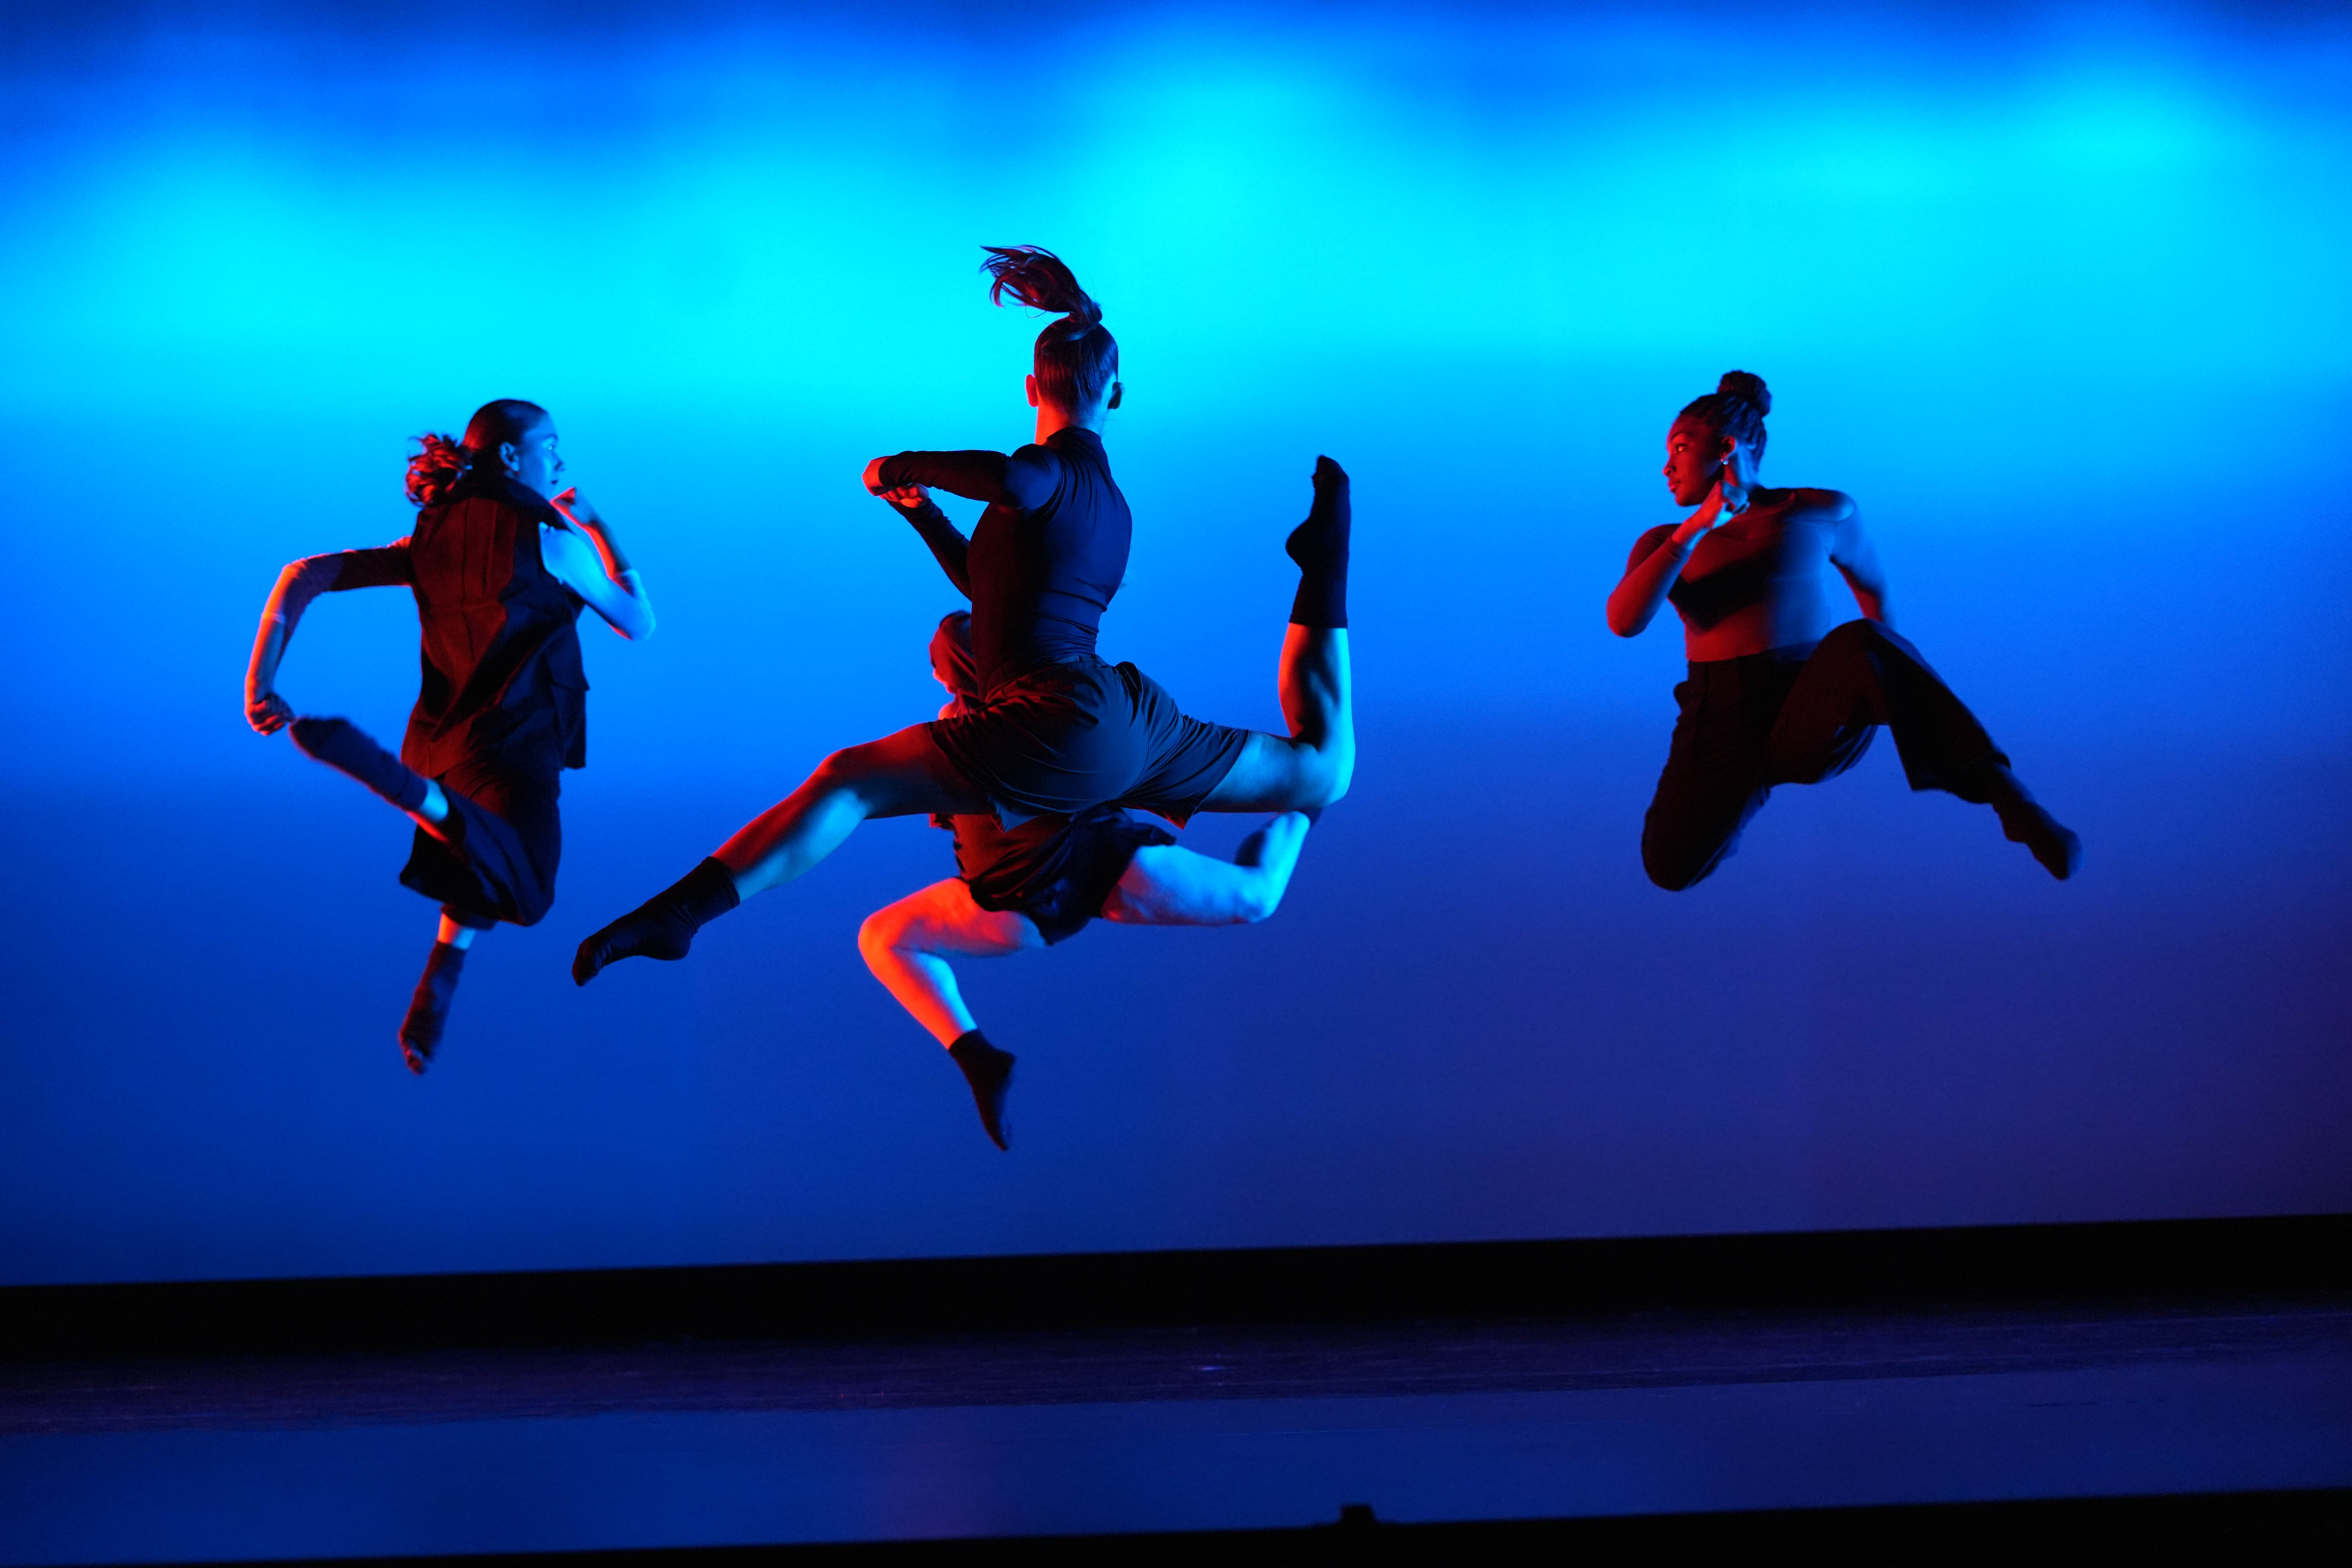 Four dancers jumping in mid-air, circling each other, against a blue-lit backdrop